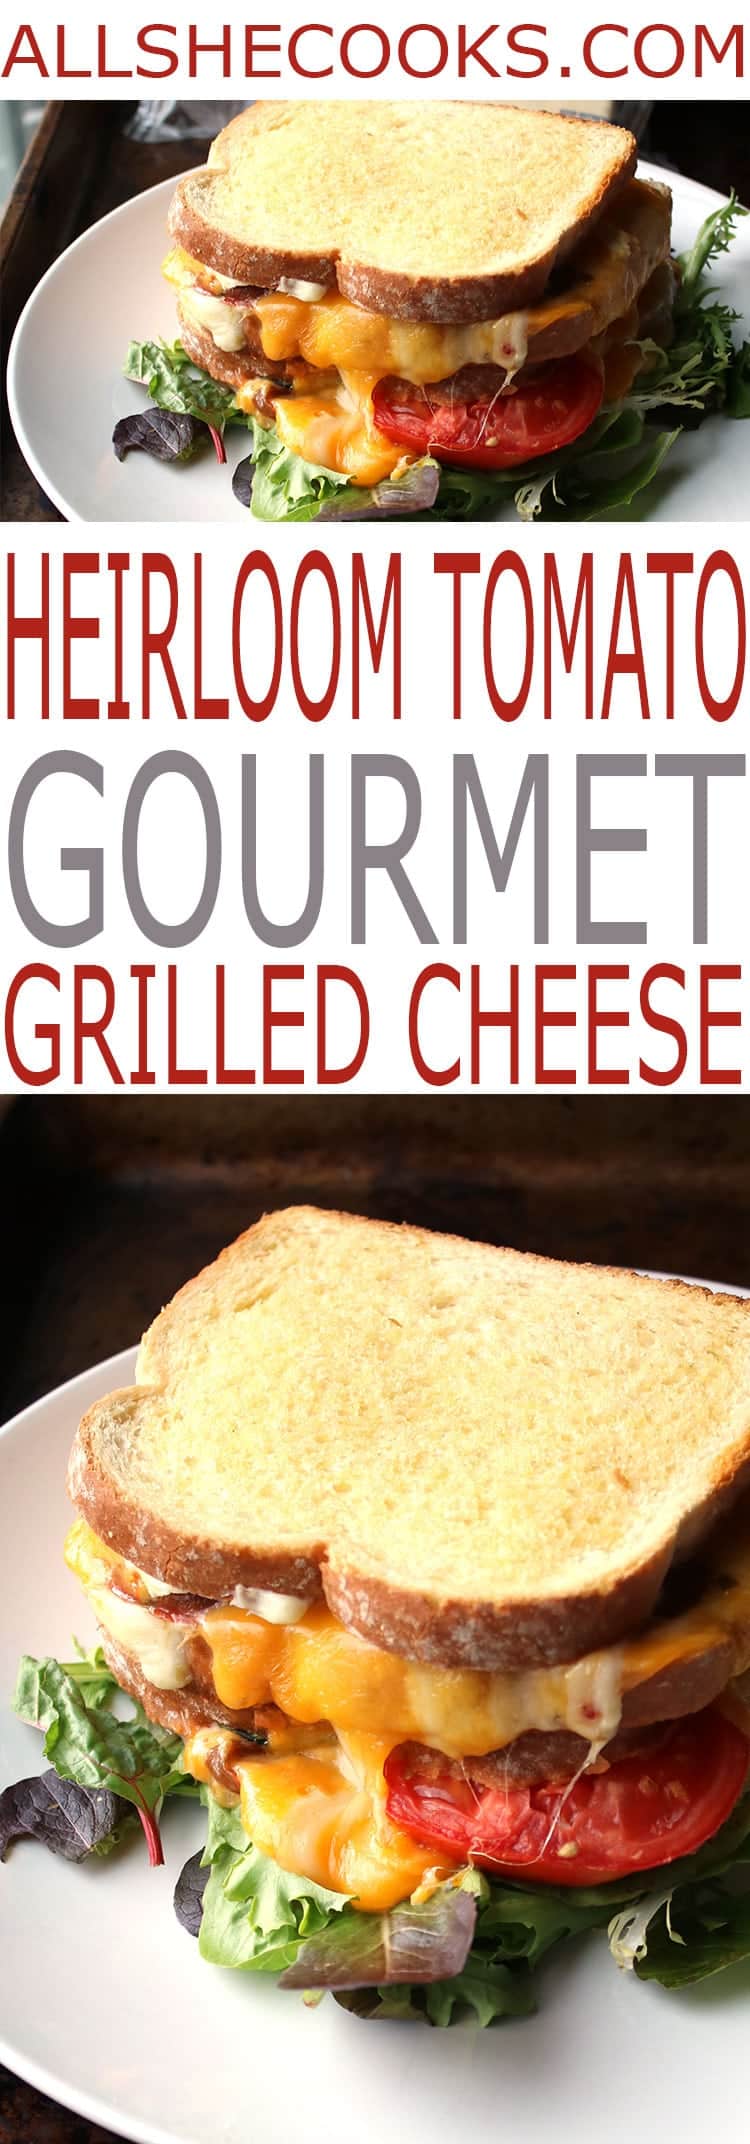 Enjoy an Heirloom Tomato Gourmet Grilled Cheese Sandwich. This is the best grown up grilled cheese sandwich around!